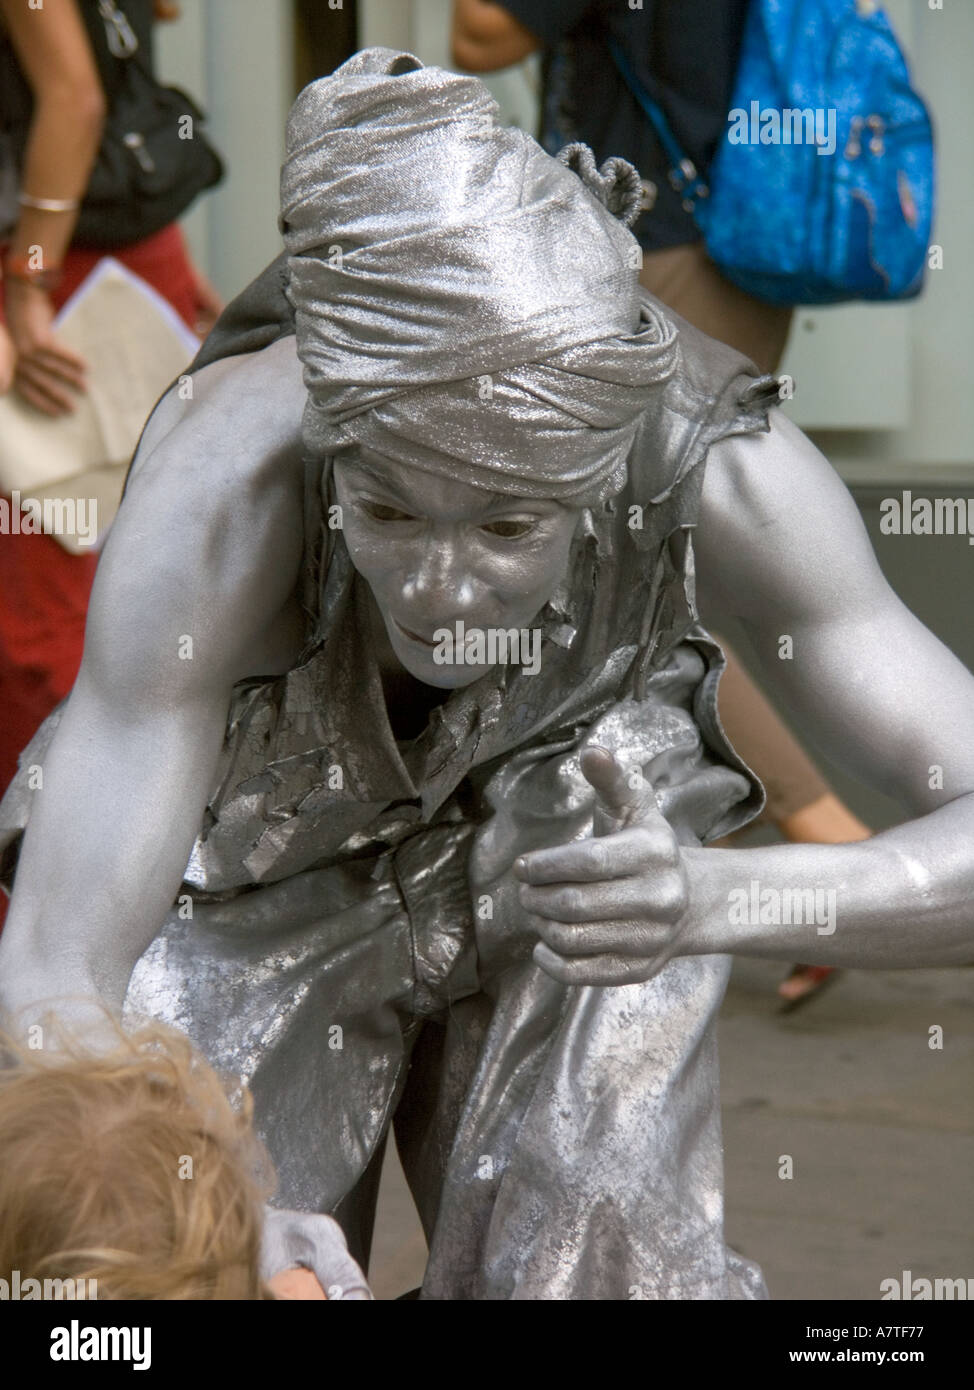 Silver Painted Street performer entertainer entertaining children Covent Garden London WC2 England turban funny hat mime artist Stock Photo